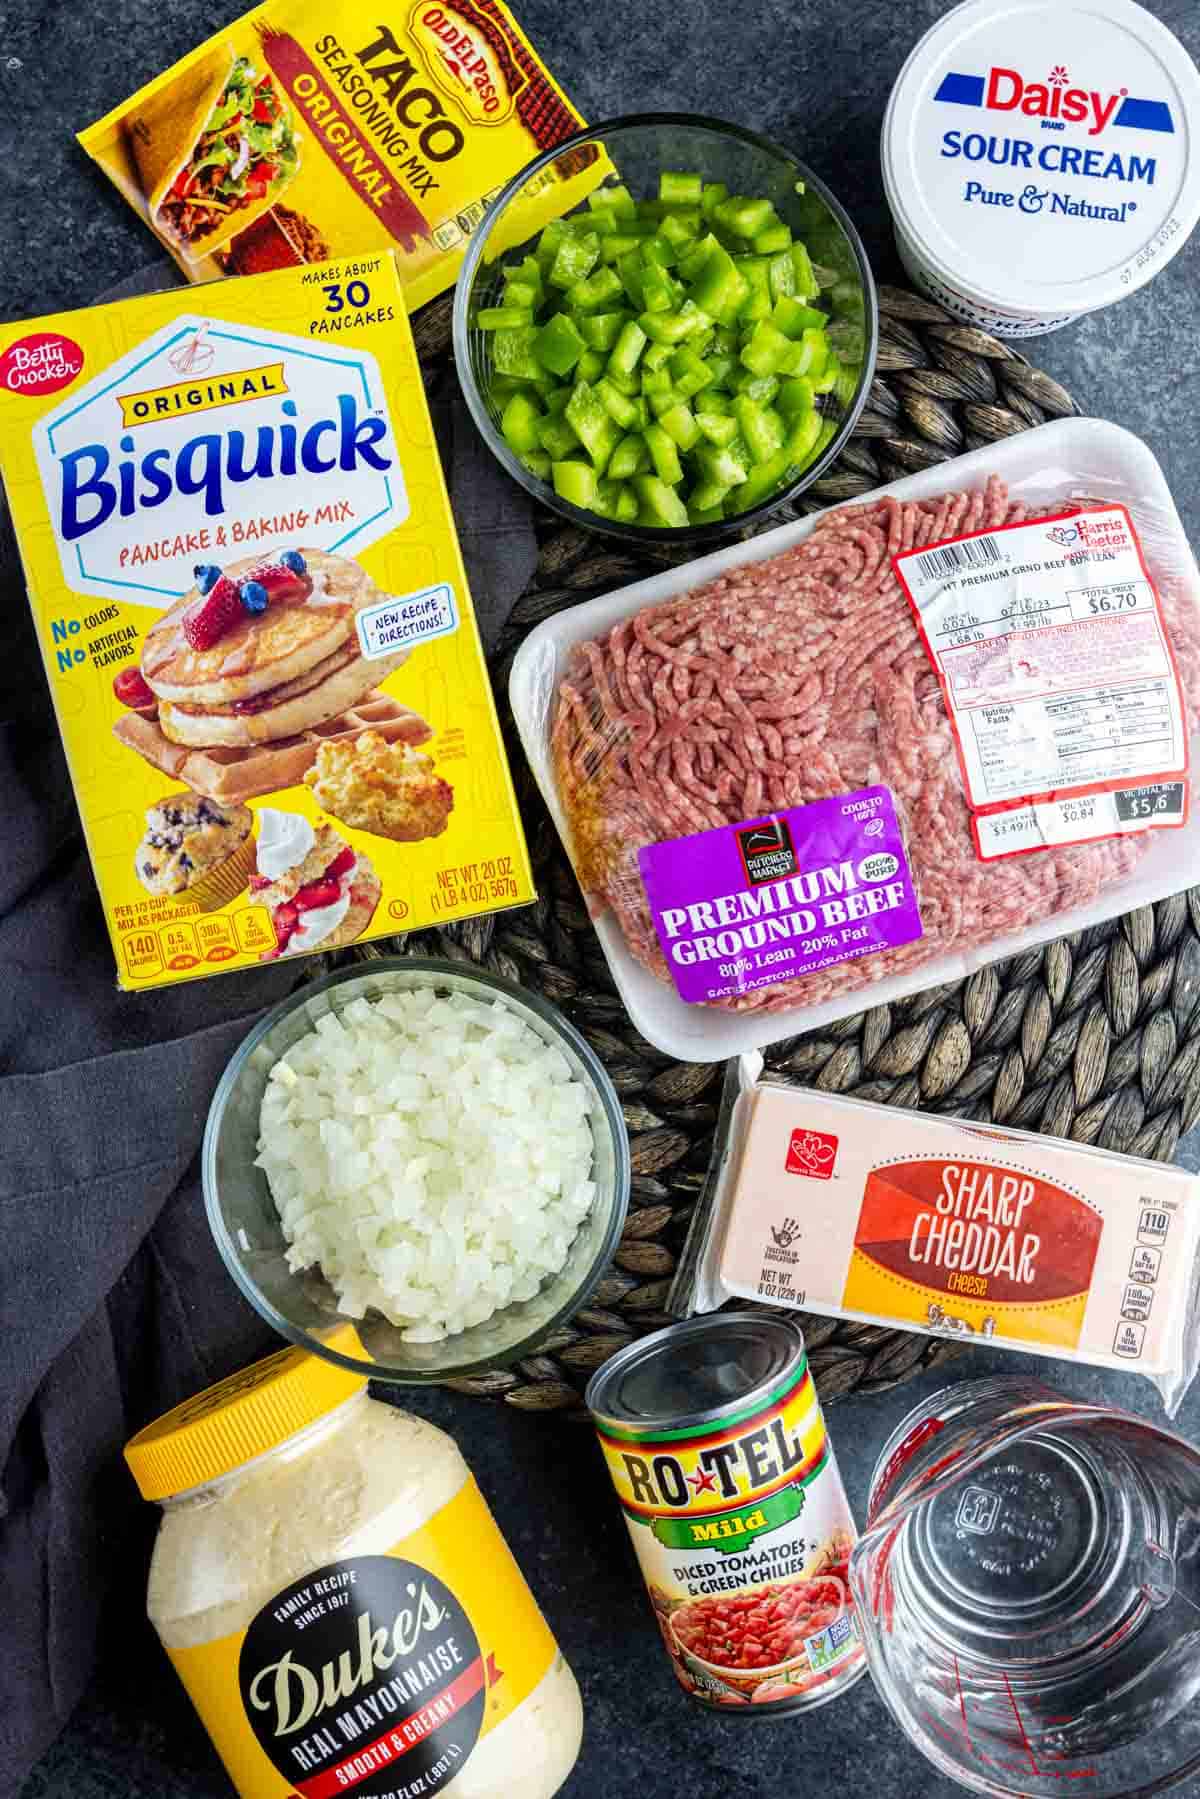 All of the ingredients for a quick and easy john wayne casserole are shown on a table.